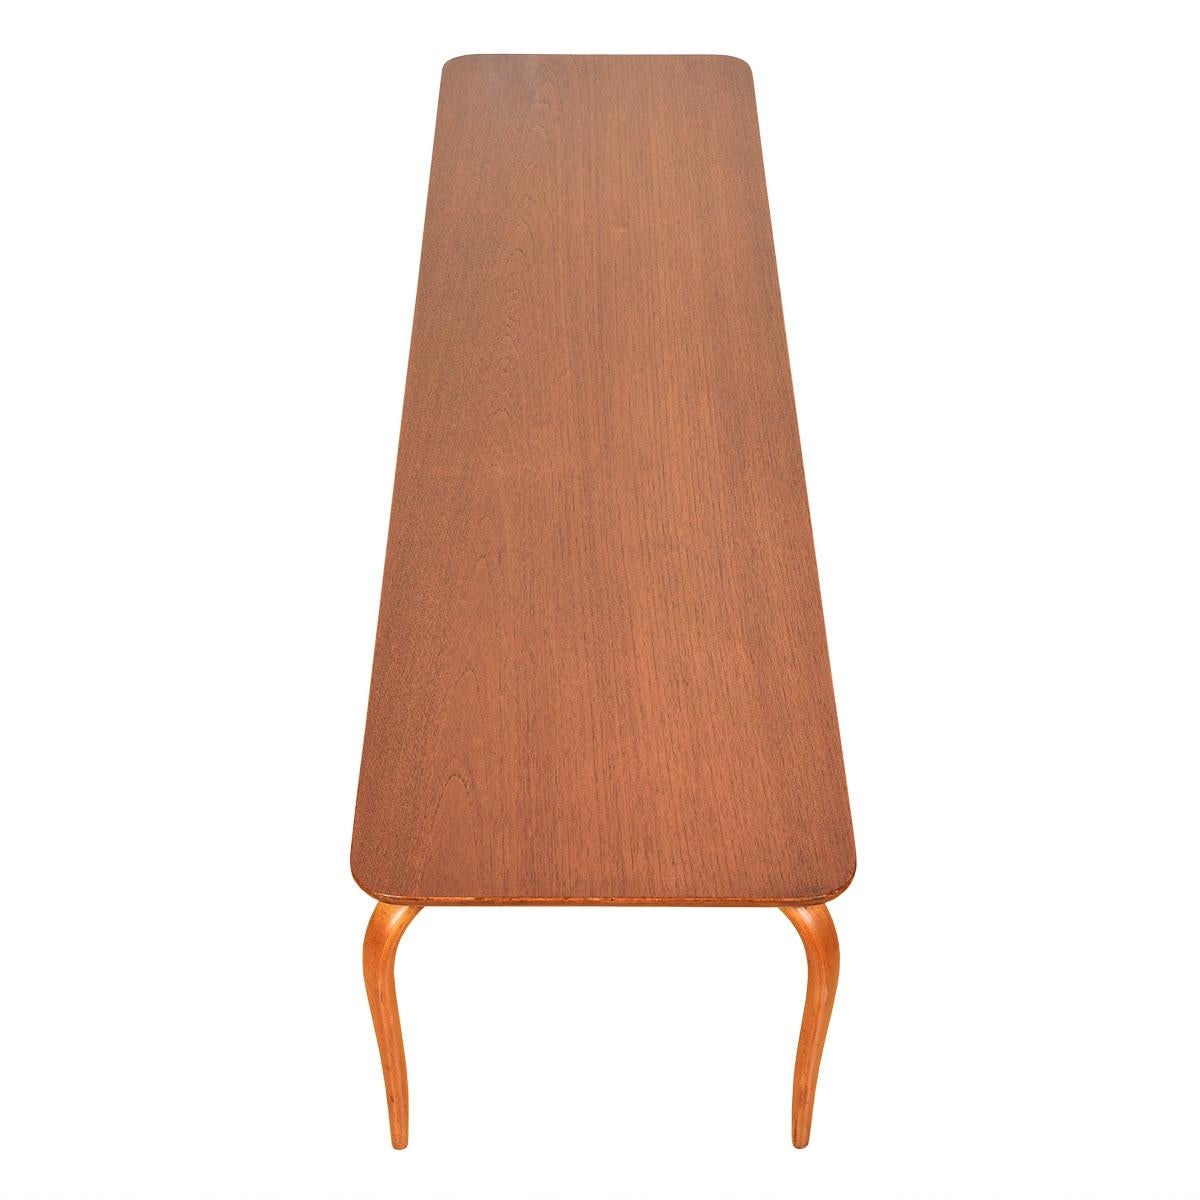 ‘Long Table’ Swedish Modern Organic-Leg Coffee Table by Bruno Mathsson, 1950’s

Additional information:
Material: Teak
Featured at Kensington:
A long and low coffee table that is less like a table and more like a sculpture.
Thin and narrow